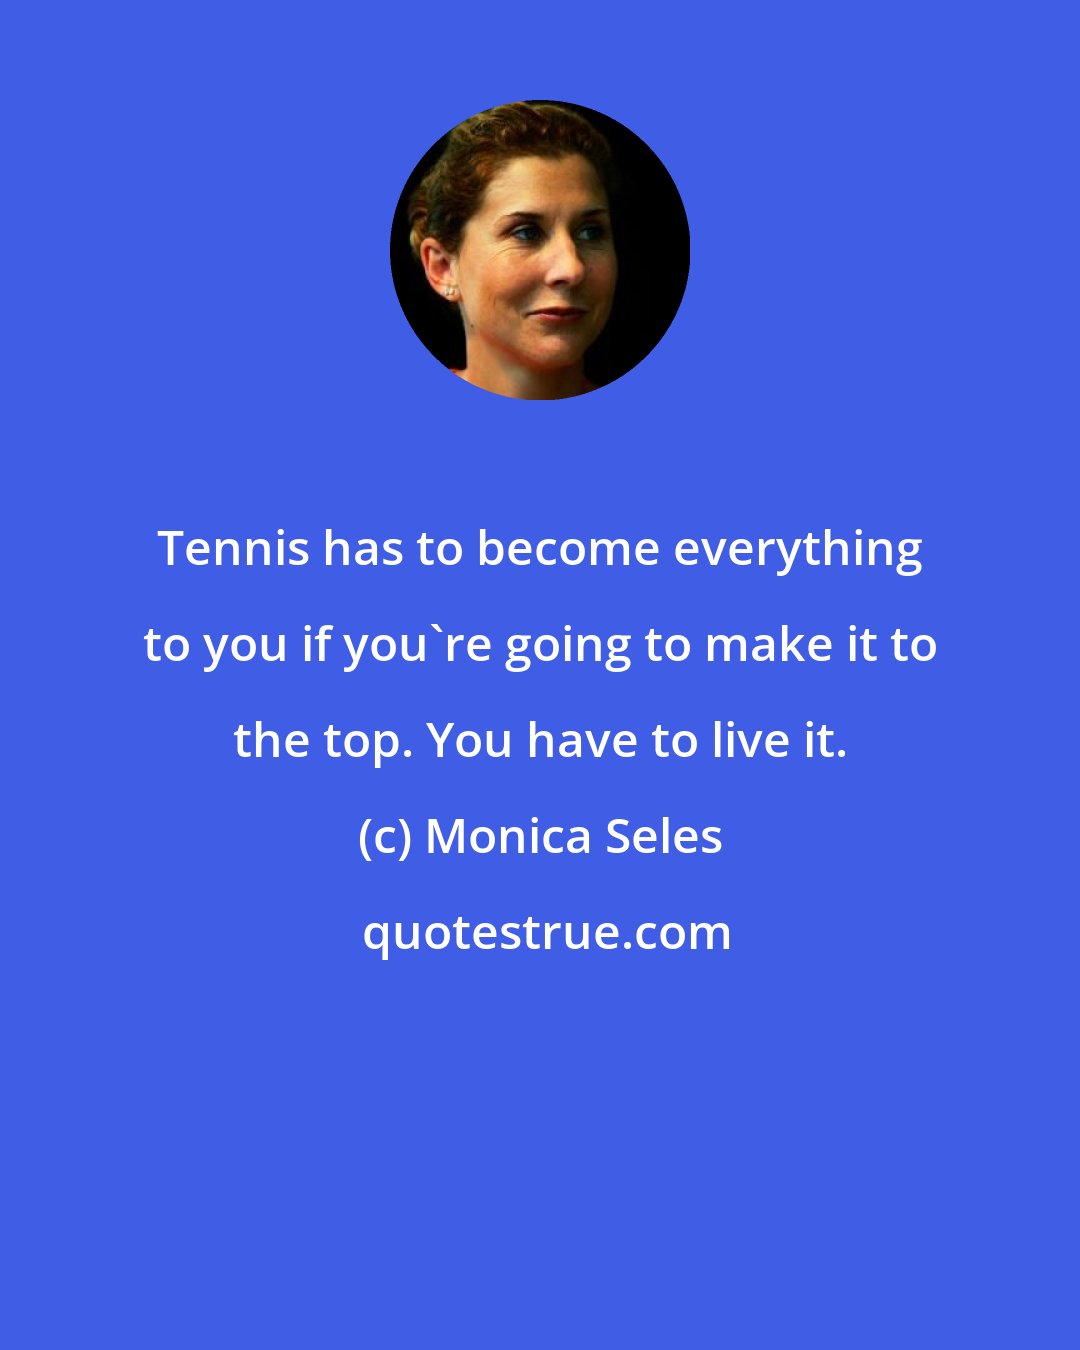 Monica Seles: Tennis has to become everything to you if you're going to make it to the top. You have to live it.